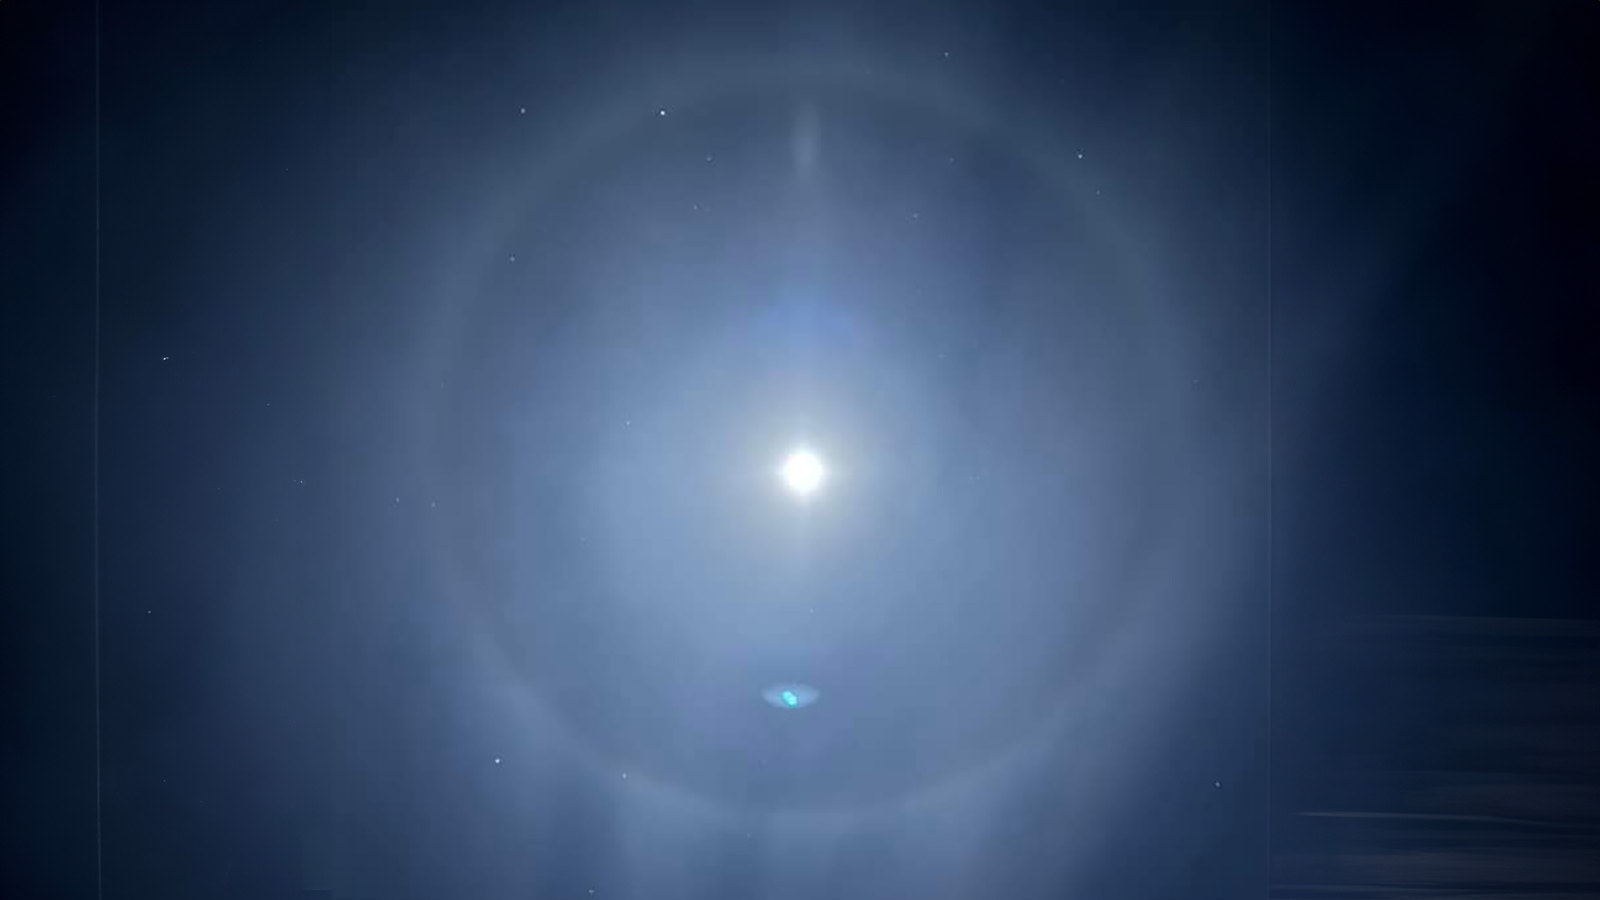 This photo of a rare moon halo seen from Sheridan was shared by James Gilbert via Wyoming Through the Lens Facebook page.